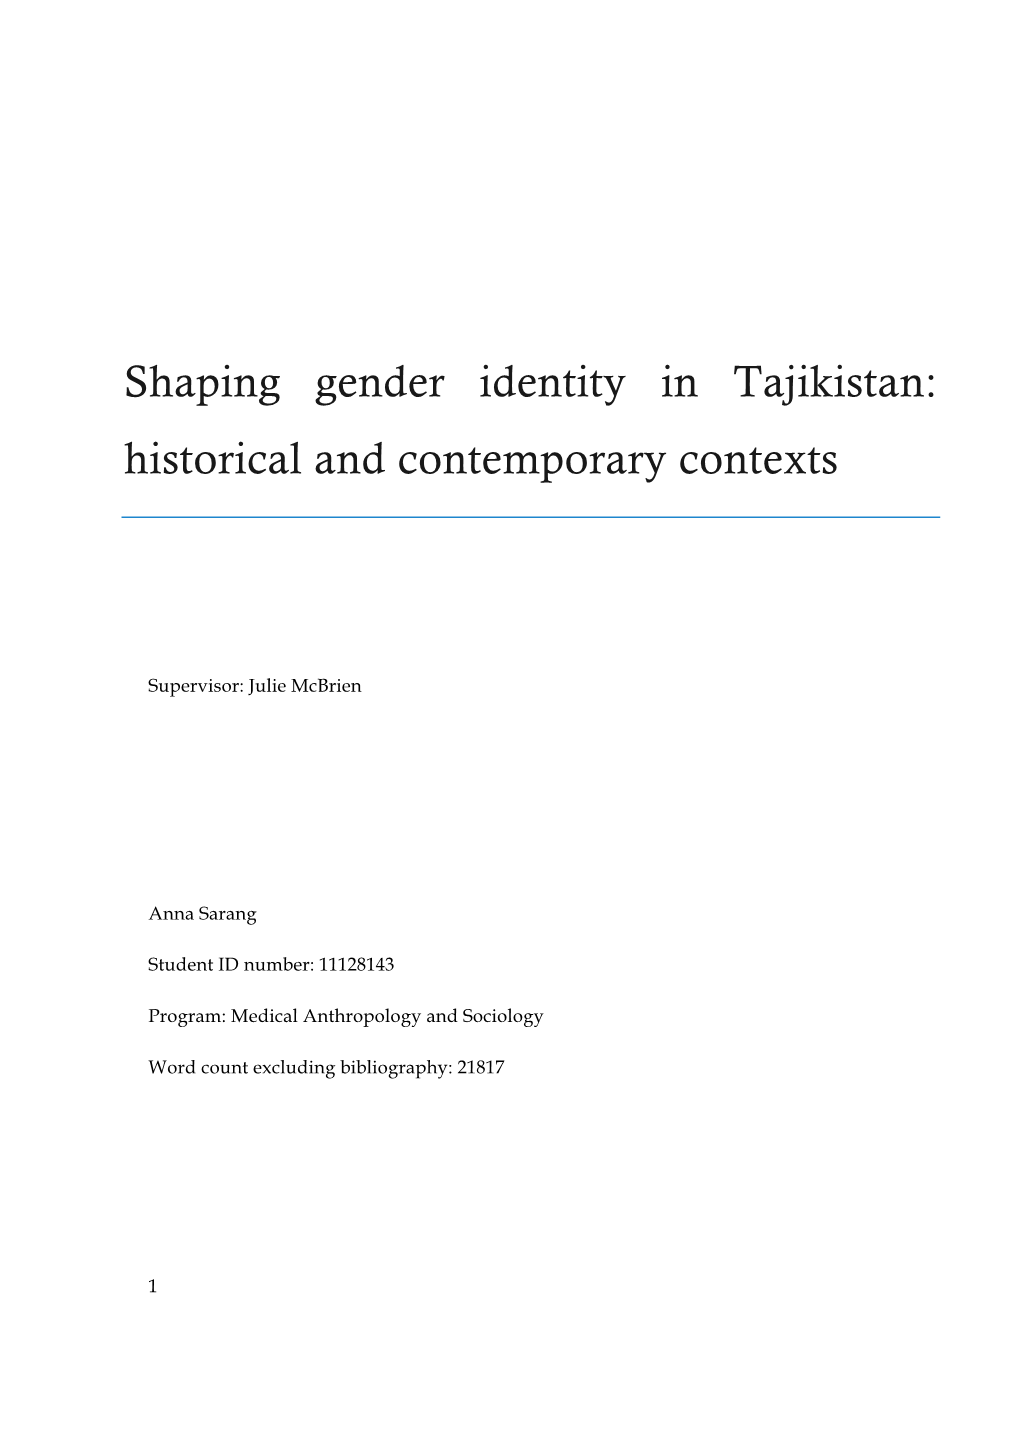 Shaping Gender Identity in Tajikistan: Historical and Contemporary Contexts